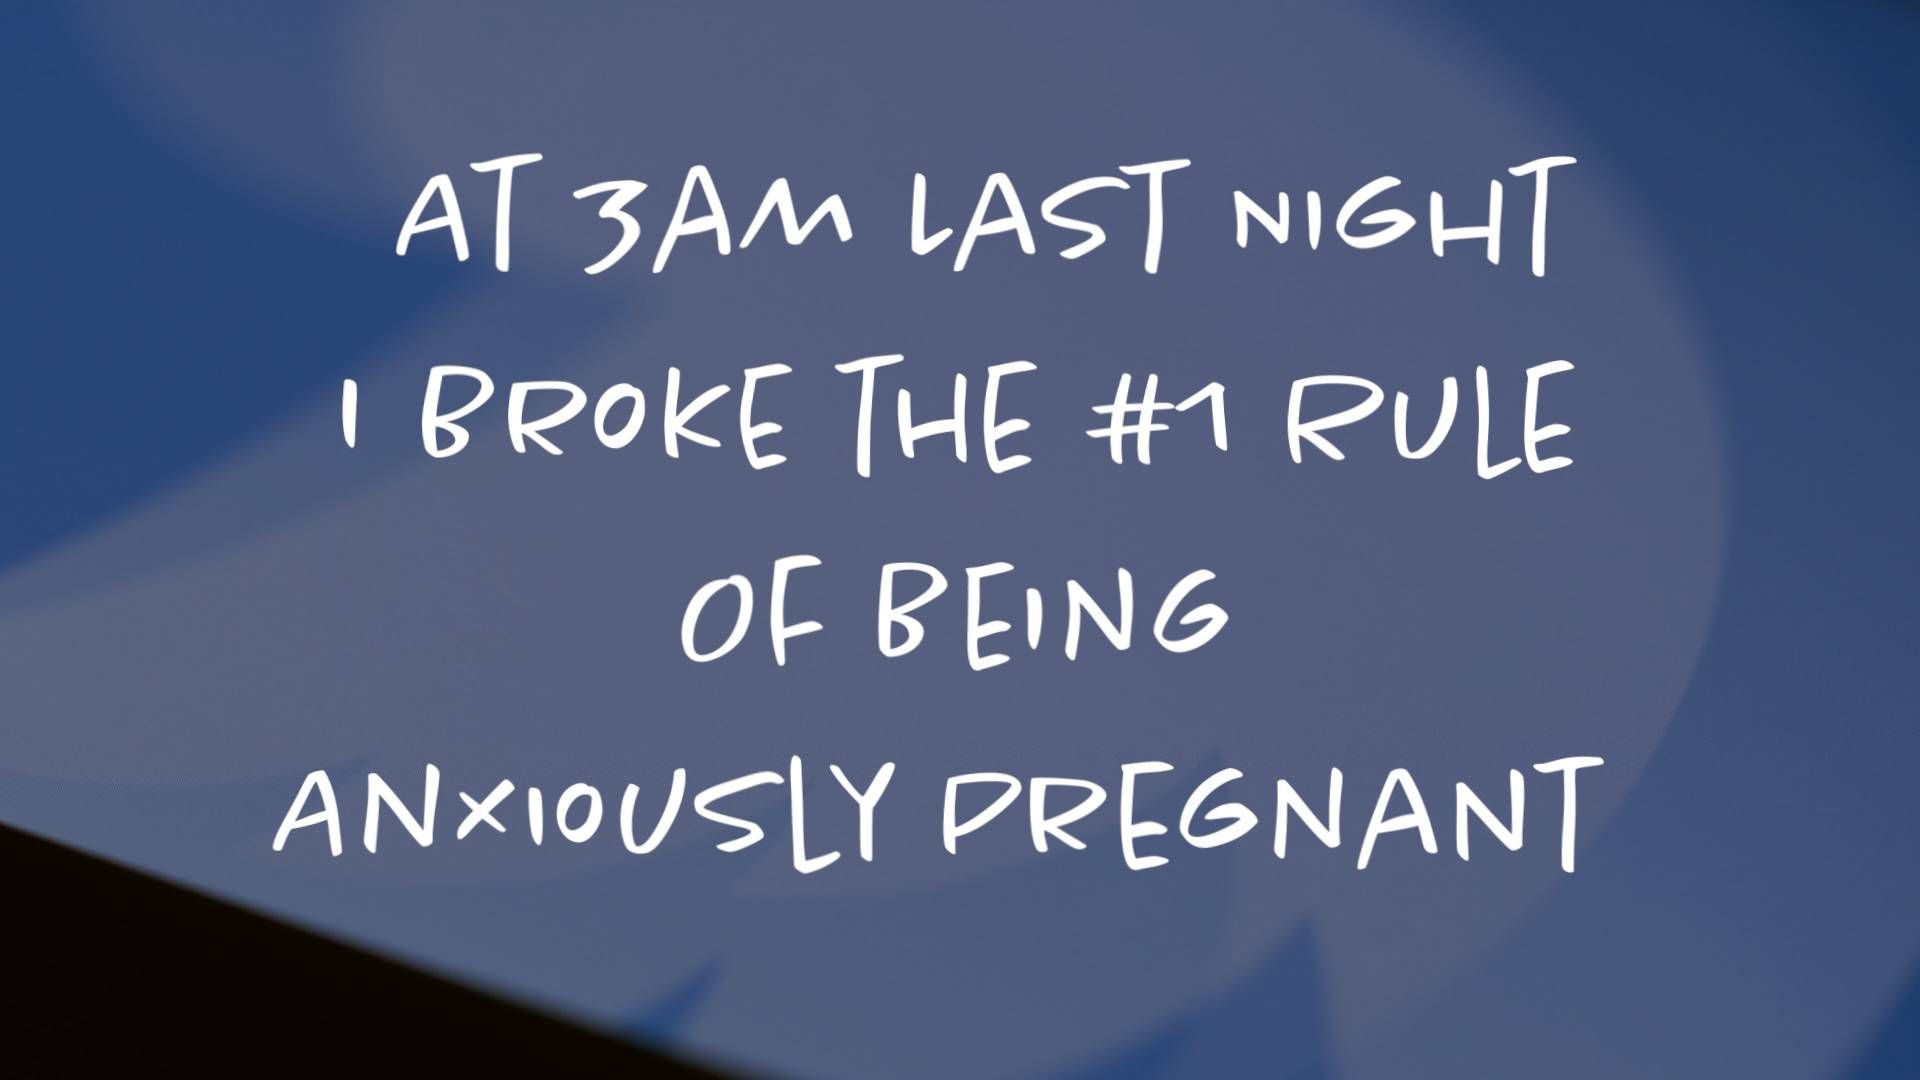 AT 3 AM LAST NIGHT I BROKE THE #1 RULE OF BEING ANXIOUSLY PREGNANT